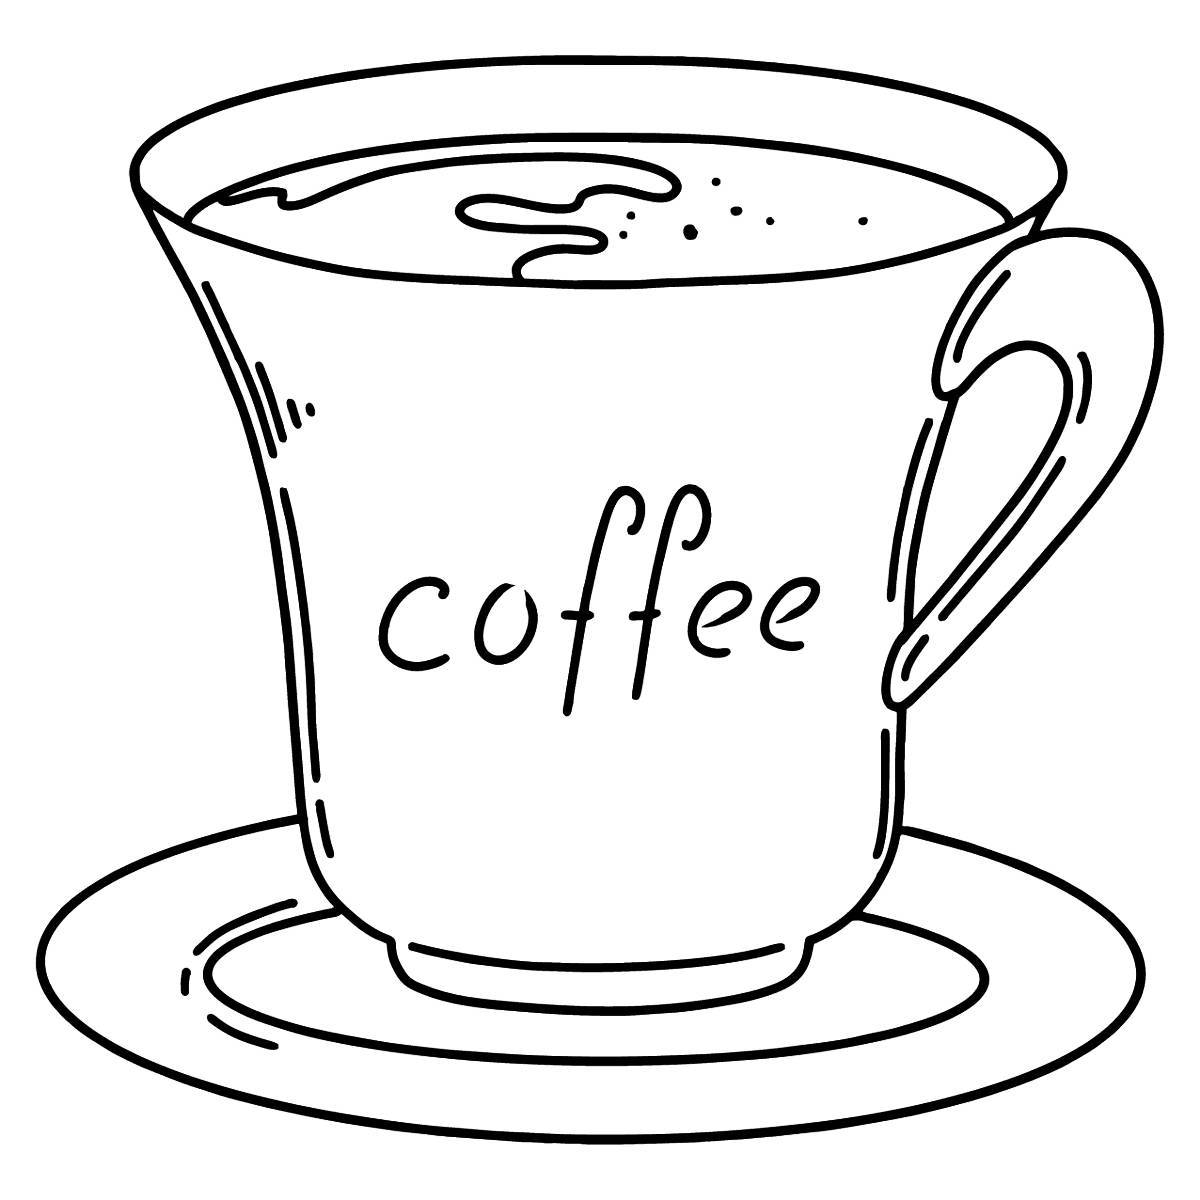 Fantastic coffee coloring page